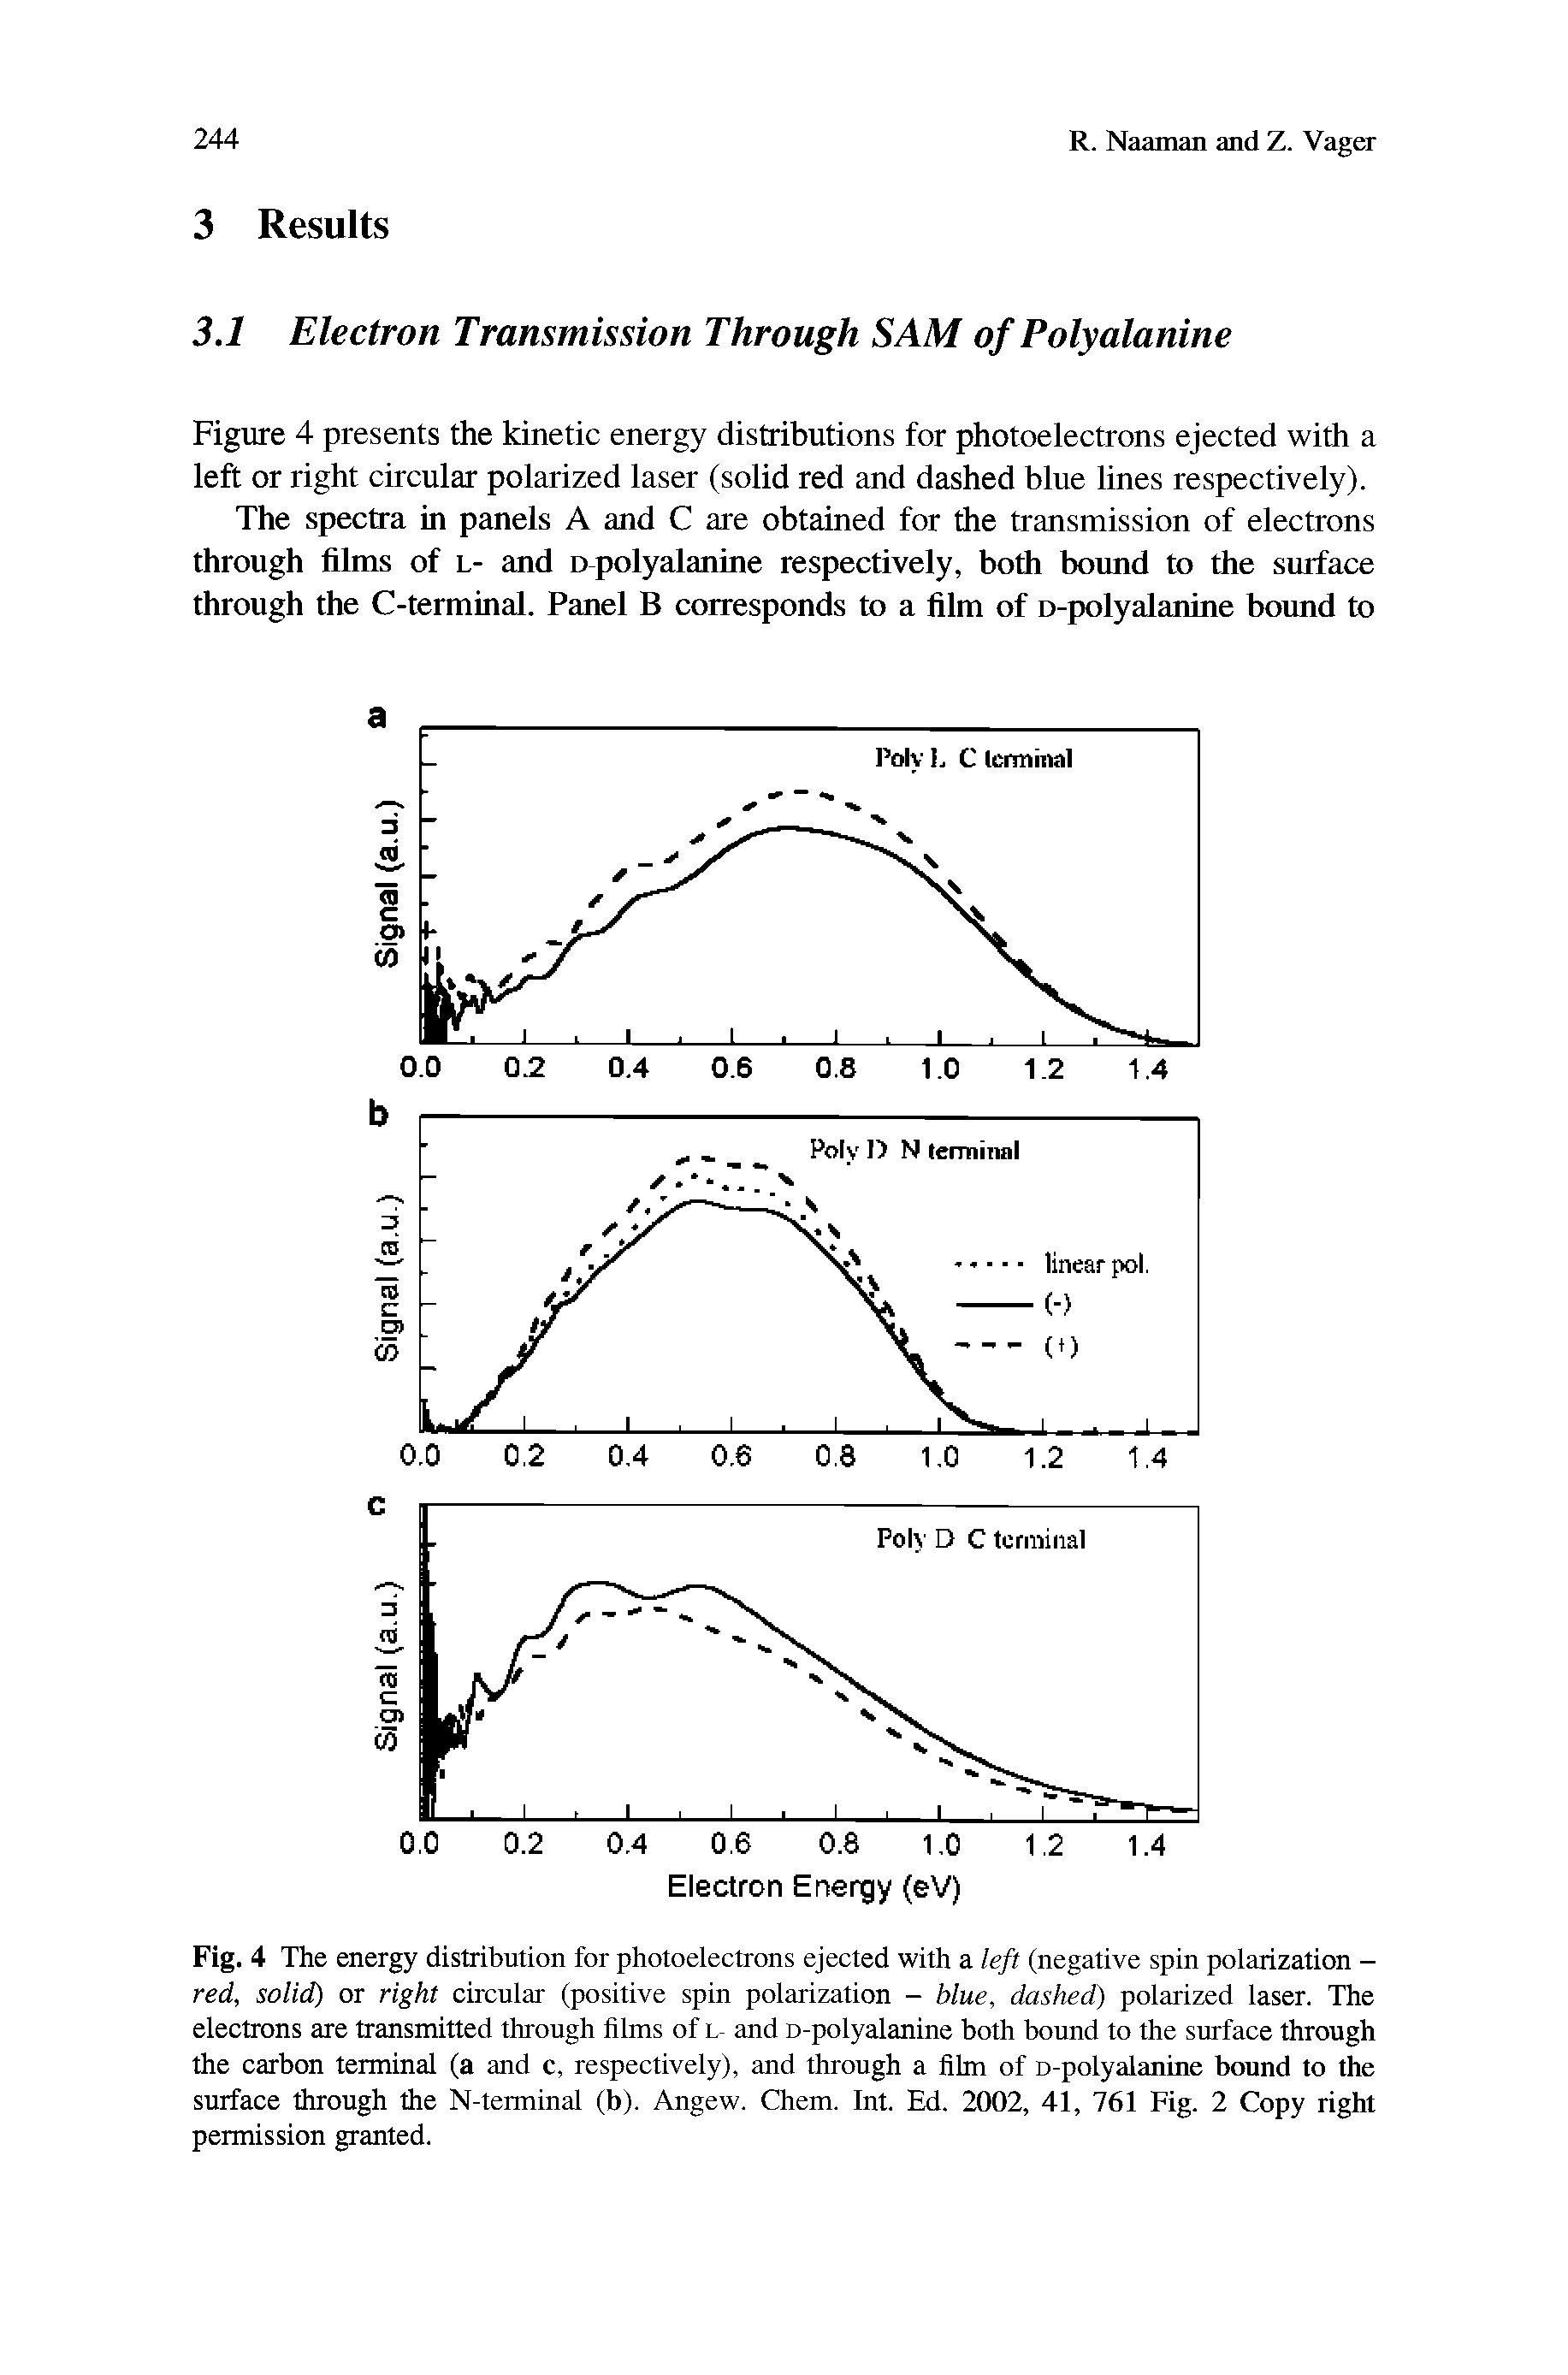 Fig. 4 The energy distribution for photoelectrons ejected with a left (negative spin polarization -red, solid) or right circular (positive spin polarization - blue, dashed) polarized laser. The electrons are transmitted through films of l- and D-polyalanine both bound to the surface through the carbon terminal (a and c, respectively), and through a film of D-polyalanine bound to the surface through the N-terminal (b). Angew. Chem. Int. Ed. 2002, 41, 761 Fig. 2 Copy right permission granted.